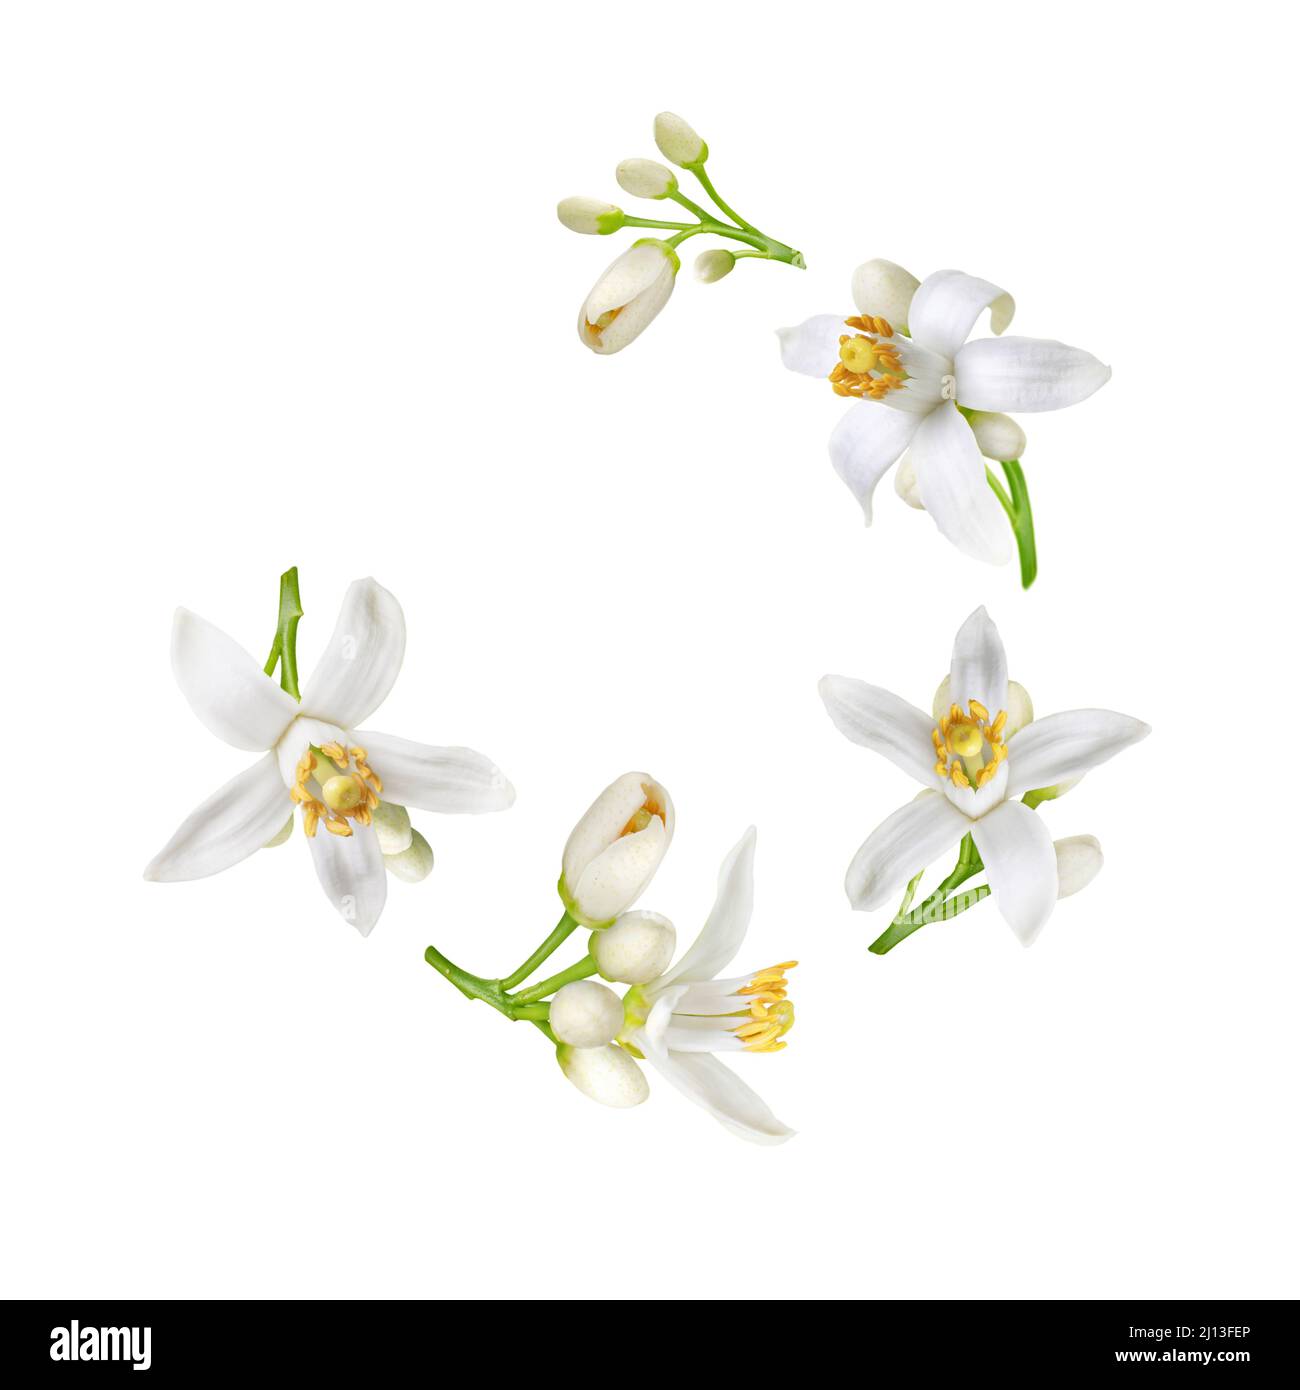 Spiral flying heap of neroli white flowers and buds isolated on white. Citrus bloom. Orange tree blossom. Stock Photo